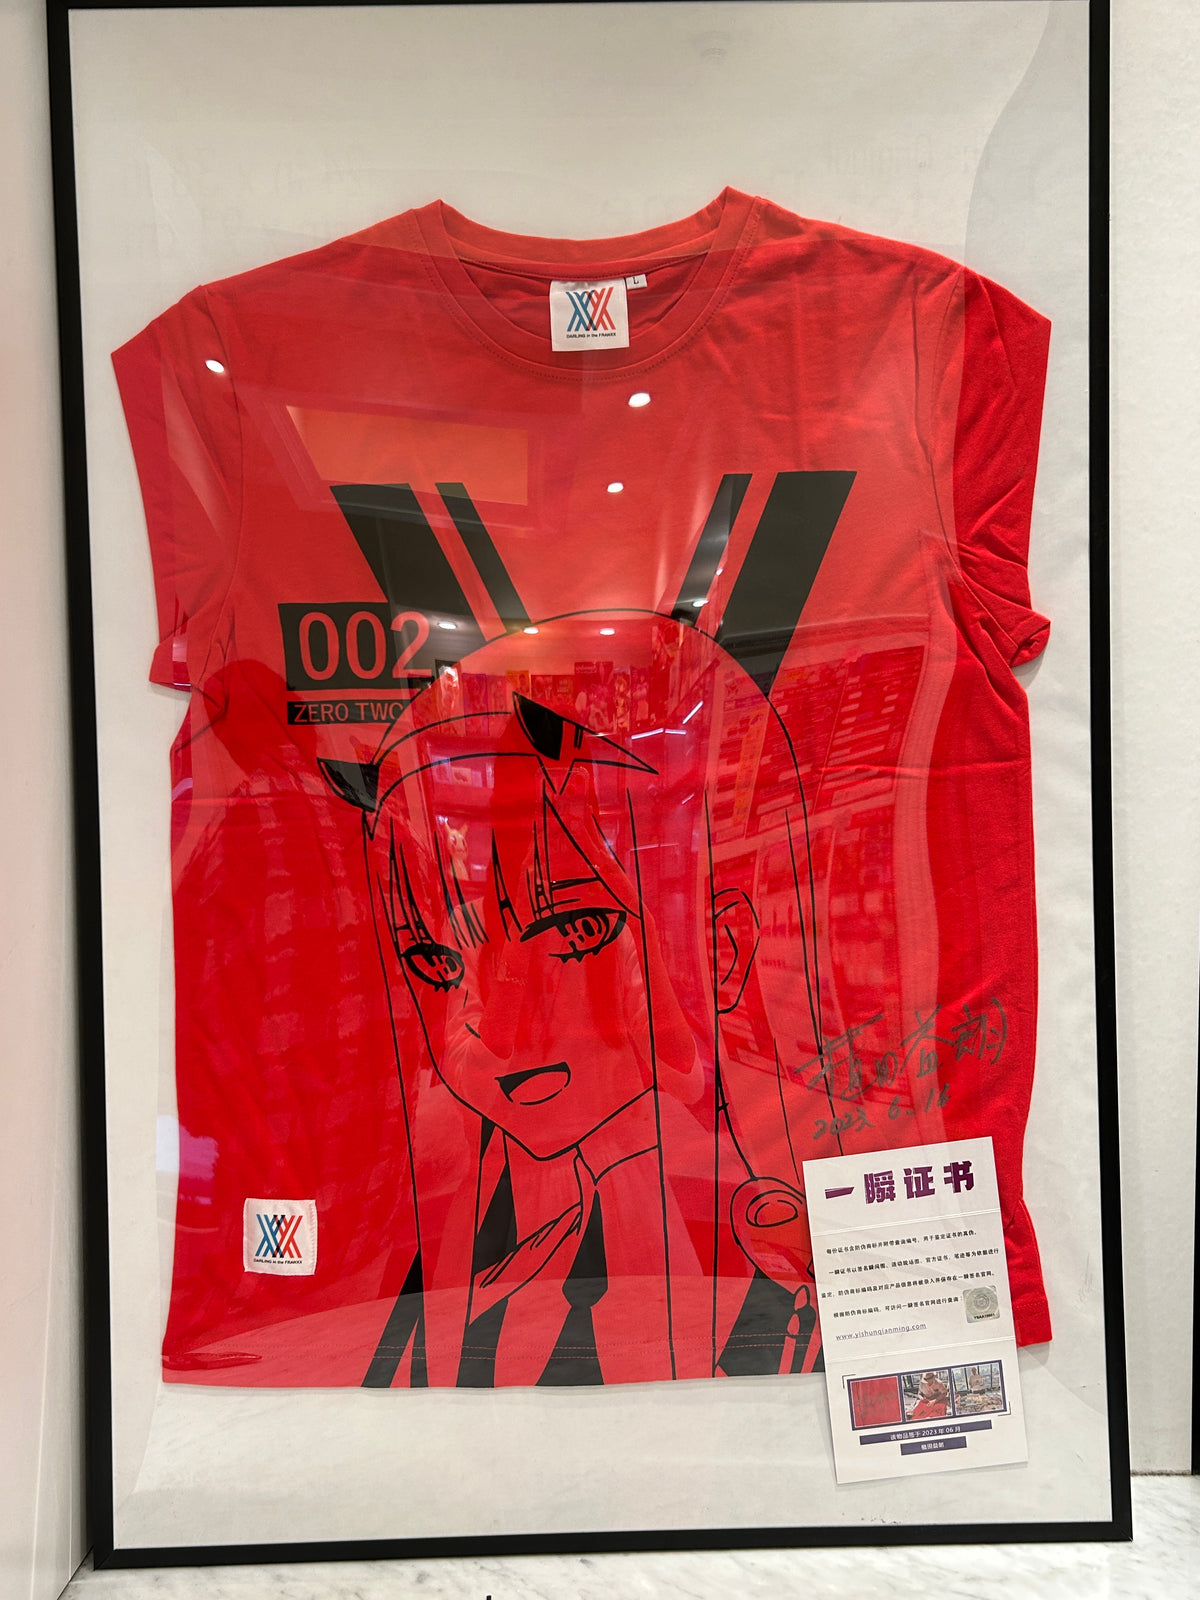 Ueda Masuo (Producer of Darling in the Franxx) Autograph on 02 T-shirt